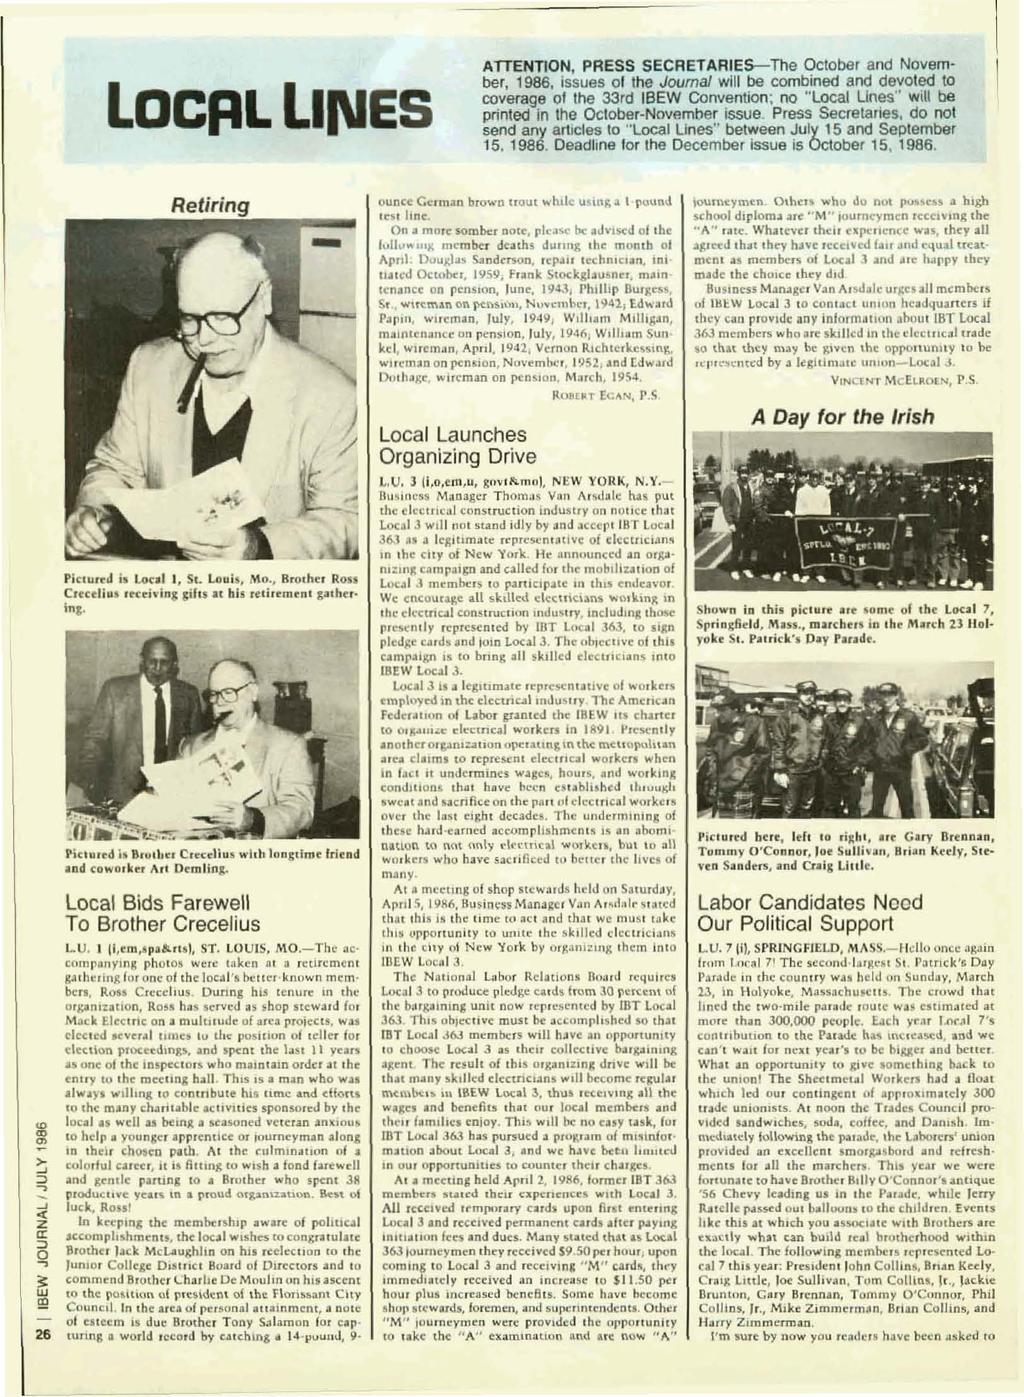 LOCRL LII\IES ATTENTION, PRESS SECRETARIES-The October and Novem ber, 1986, Issues of the Journal will be combined and devoted to coverage of the 33rd fsew Convention; no "Local Unes" wtlt be printed